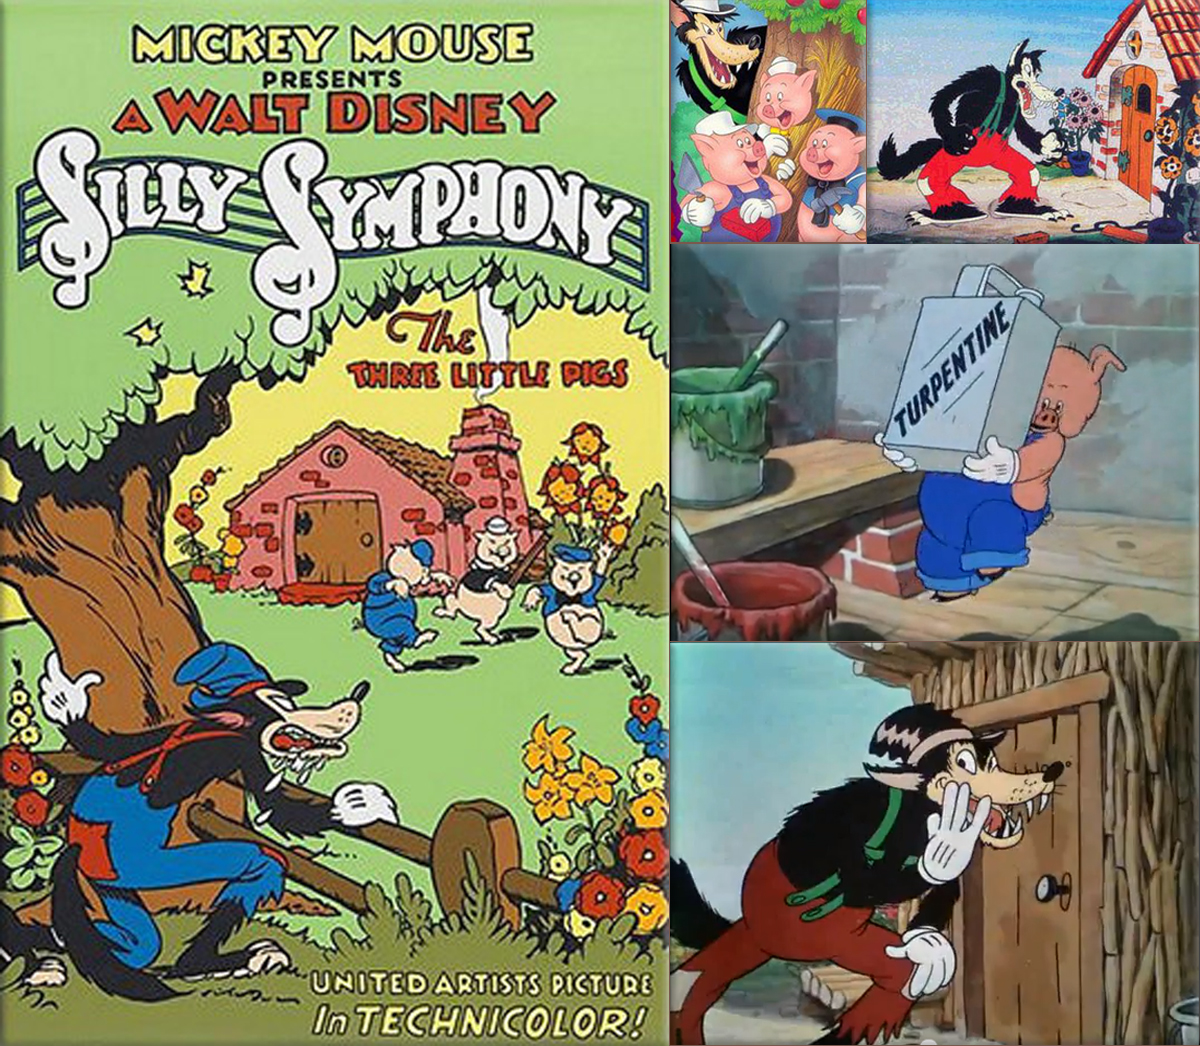 The Walt Disney Company releases the cartoon Three Little Pigs, with its hit song Who's Afraid of the Big Bad Wolf?